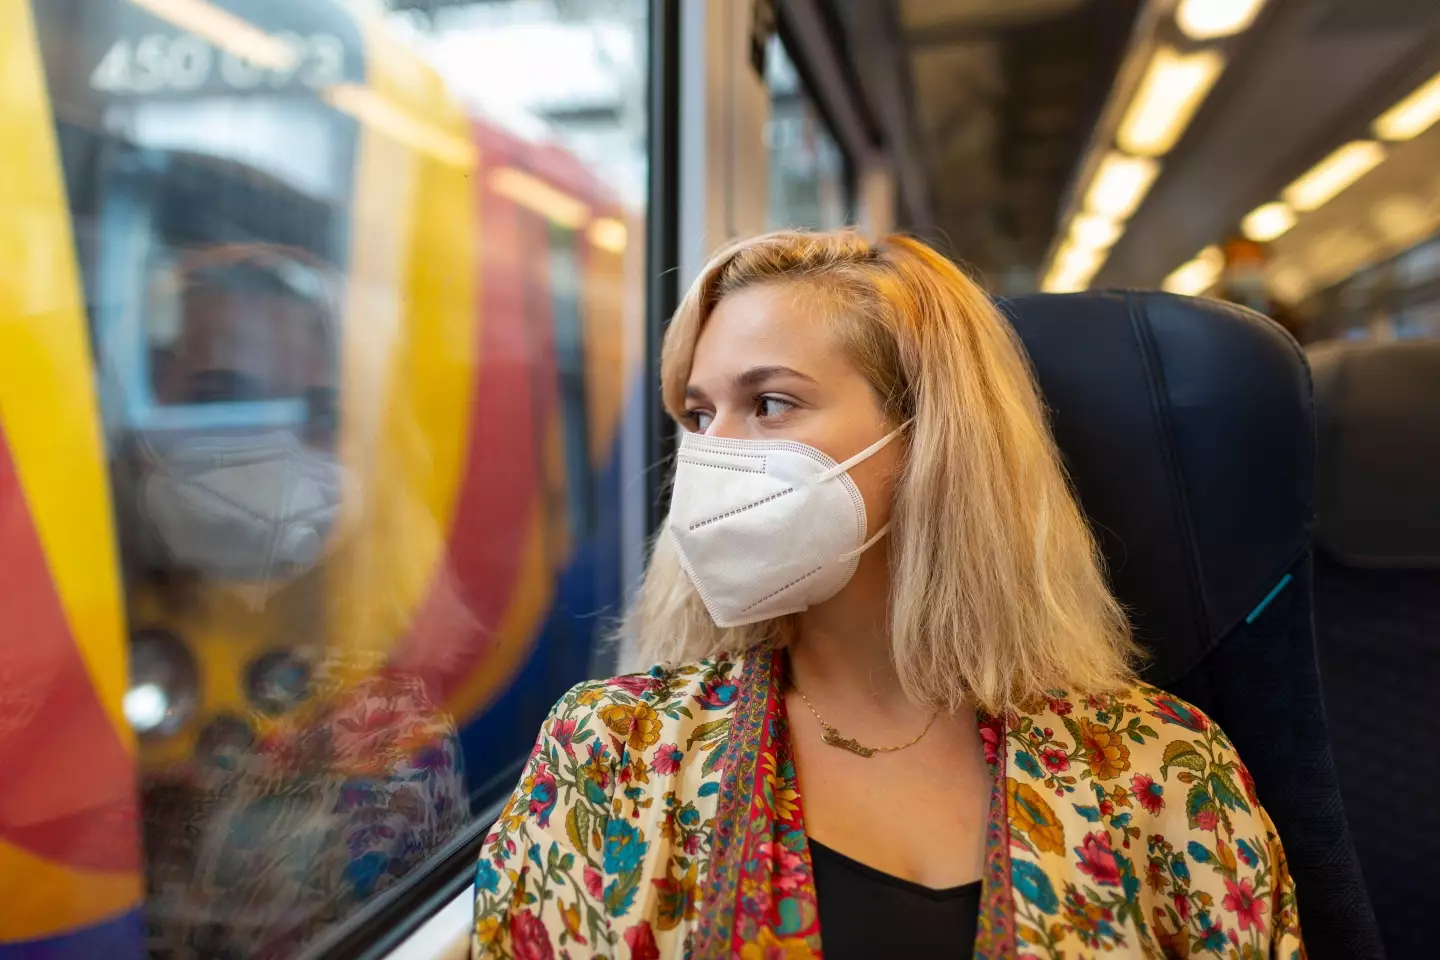 Face masks are currently compulsory on public transport.